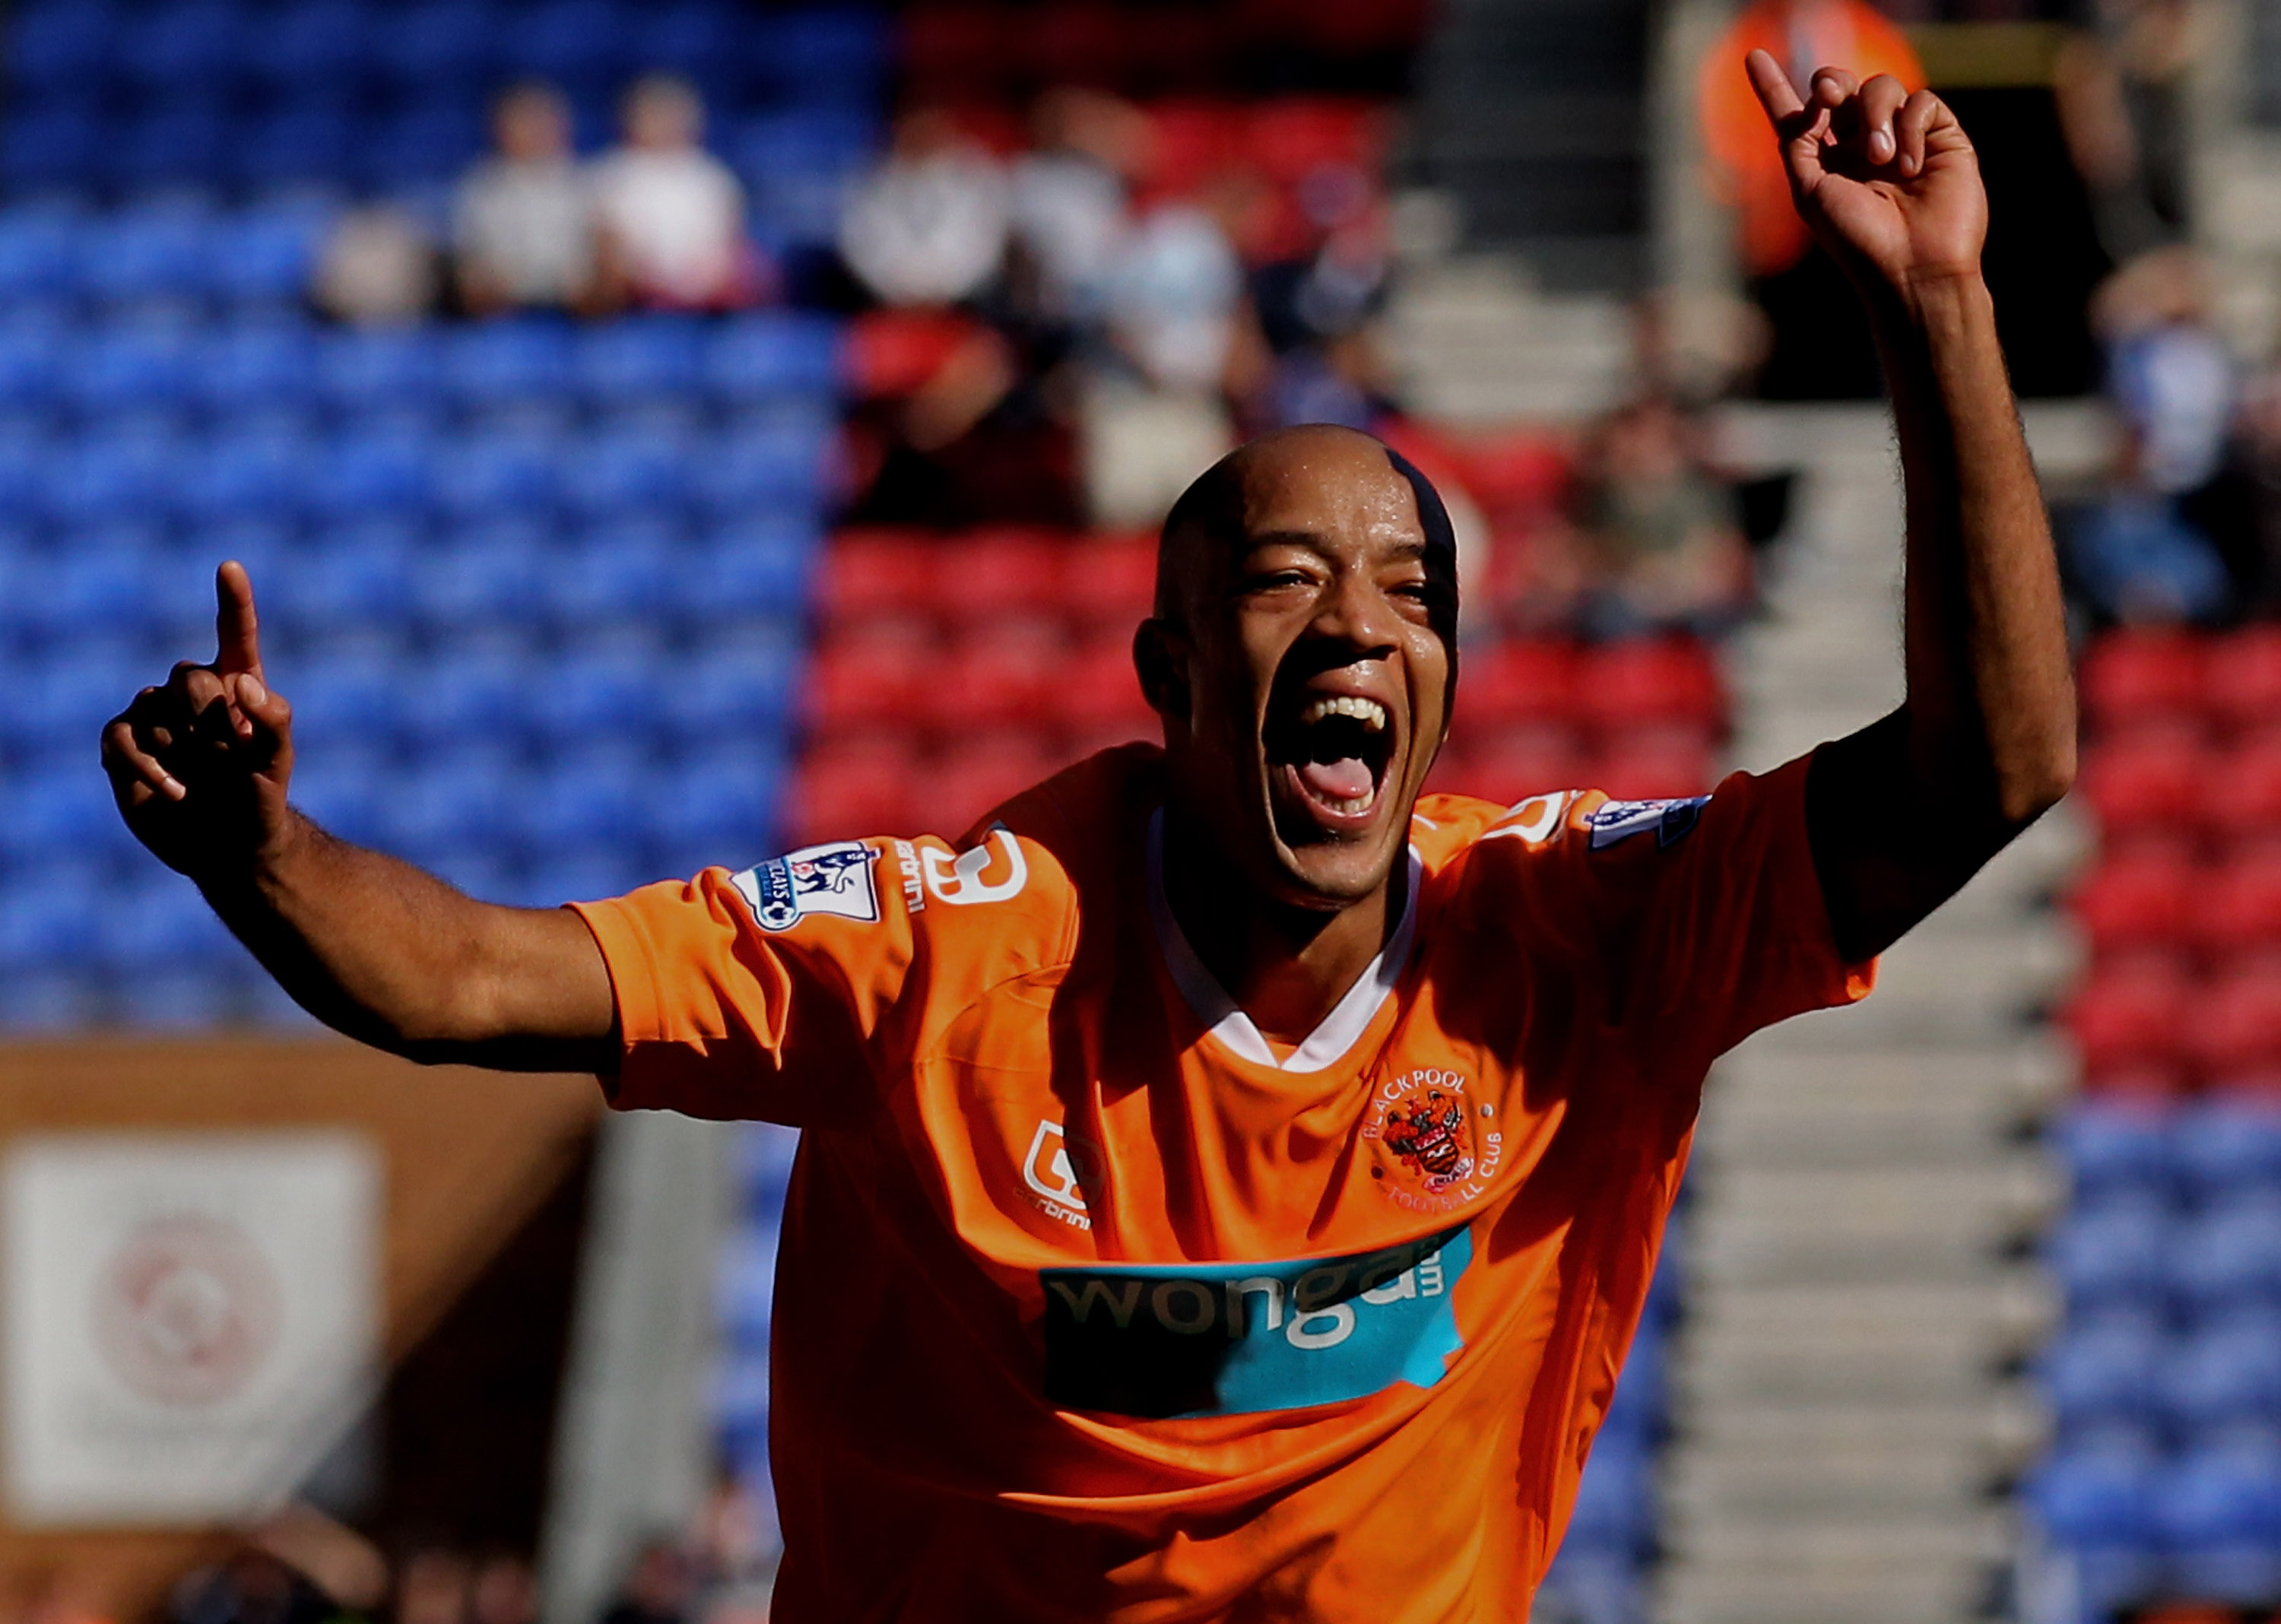 WIGAN, ENGLAND - AUGUST 14:  Alex Baptiste of Blackpool celebrates scoring his team's fourth goal during the Barclays Premier League match between Wigan Athletic and Blackpool at the DW Stadium on August 14, 2010 in Wigan, England.  (Photo by Alex Livesey